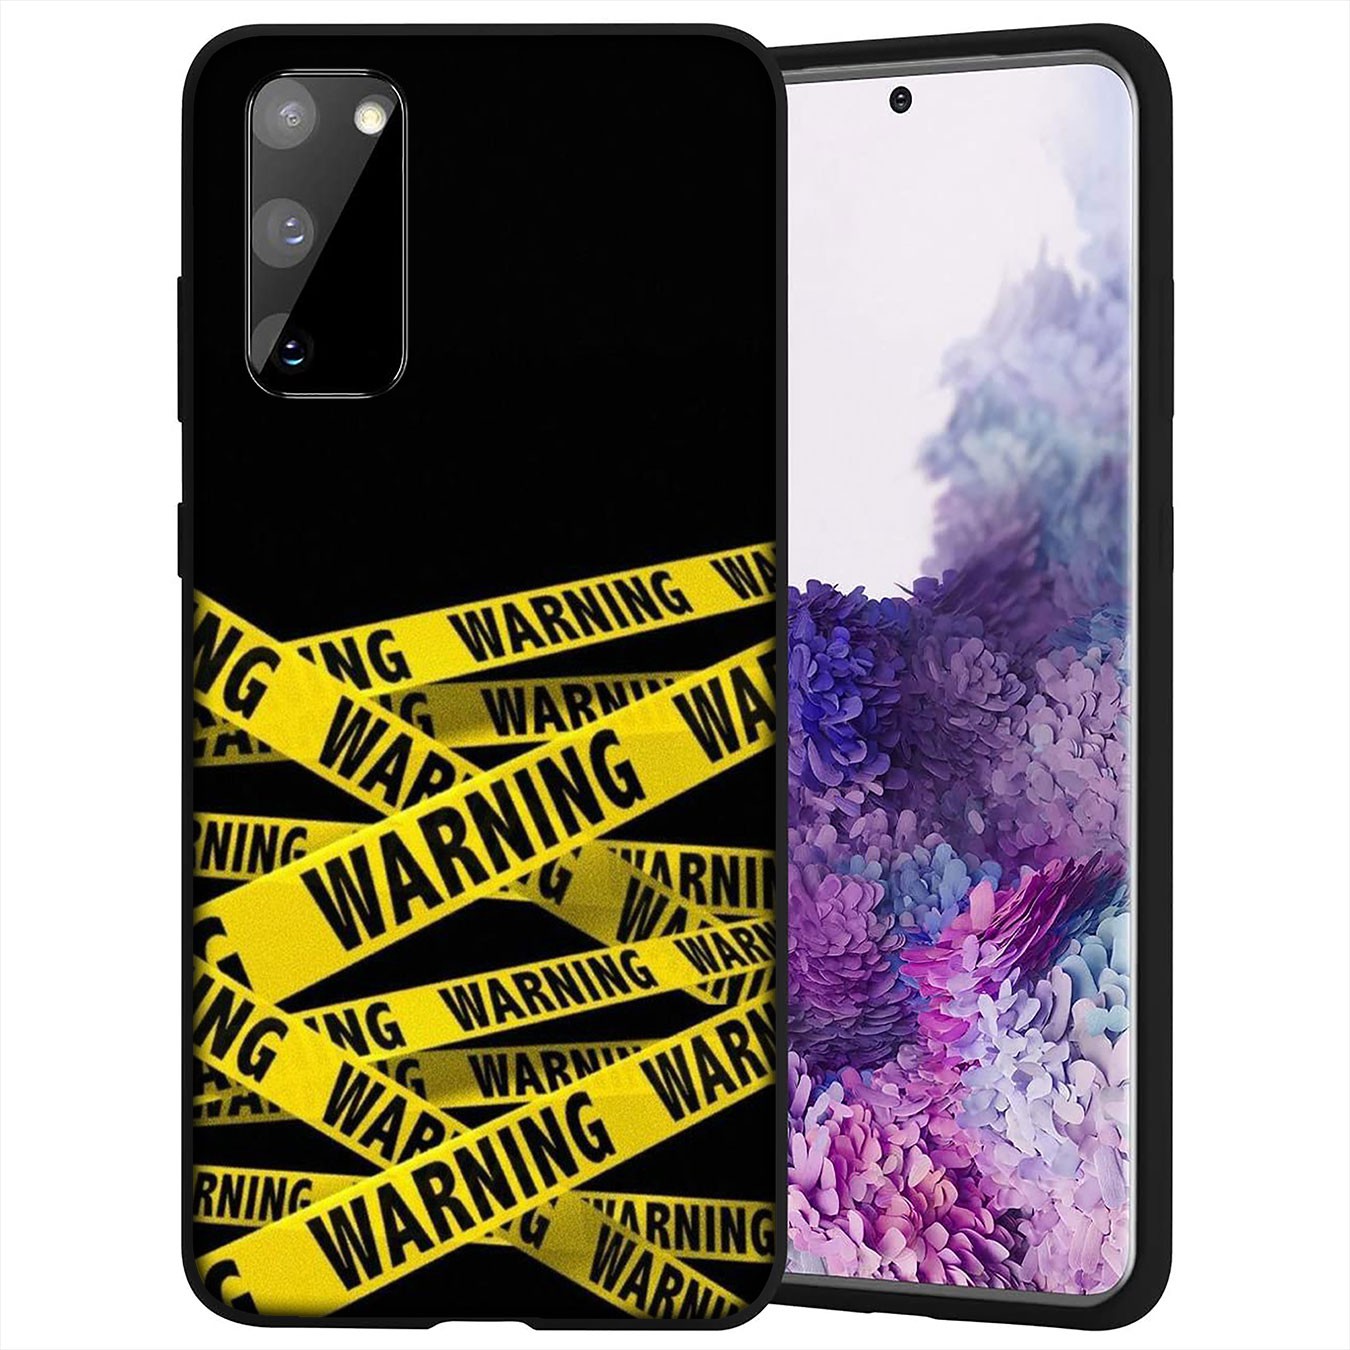 Samsung Galaxy A02S J2 J4 J5 J6 Plus J7 Prime A02 M02 j6+ A42 + Casing Soft Silicone black and Off White Phone Case